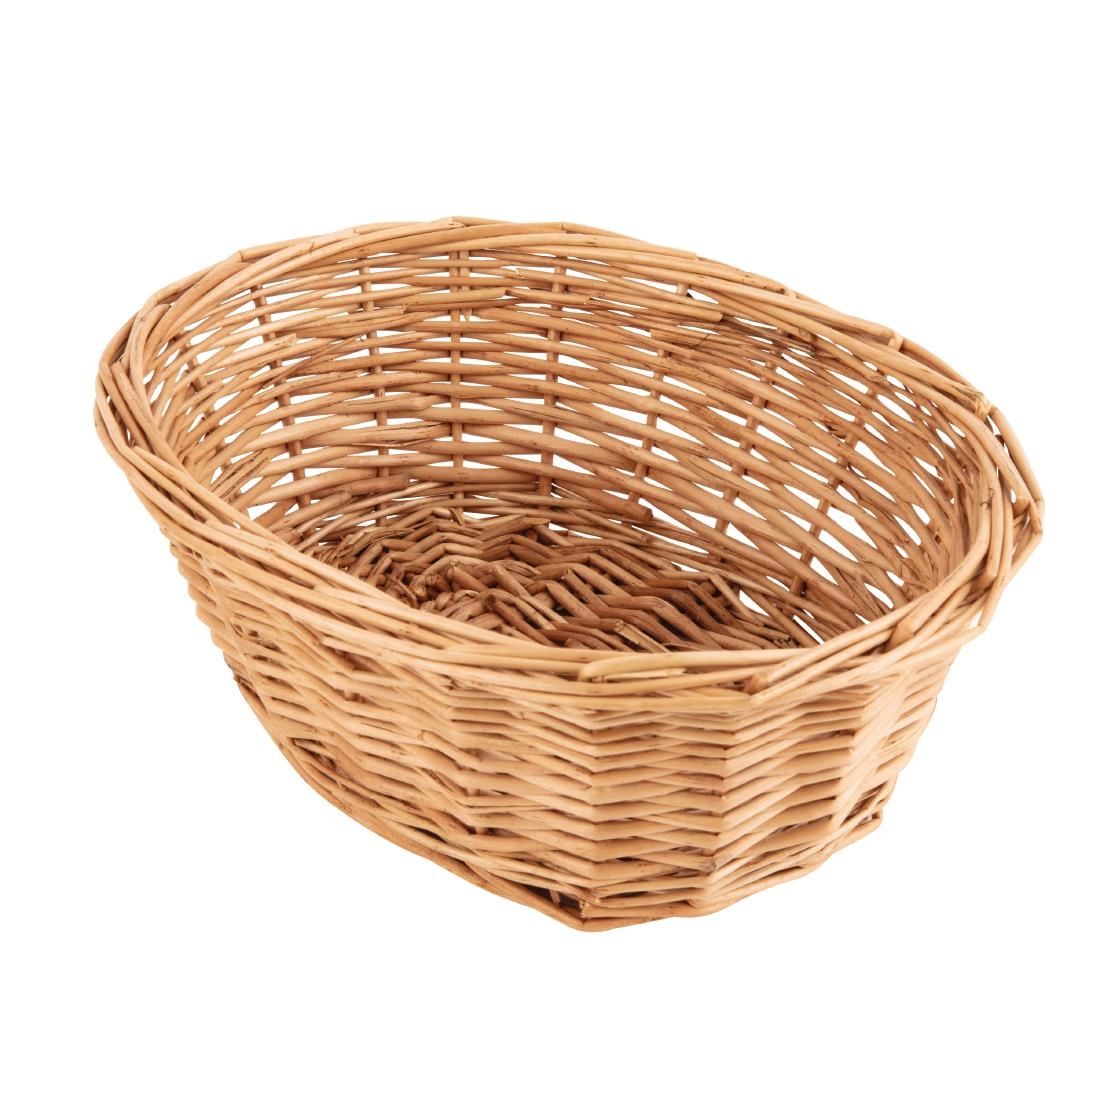 P764 Willow Oval Basket